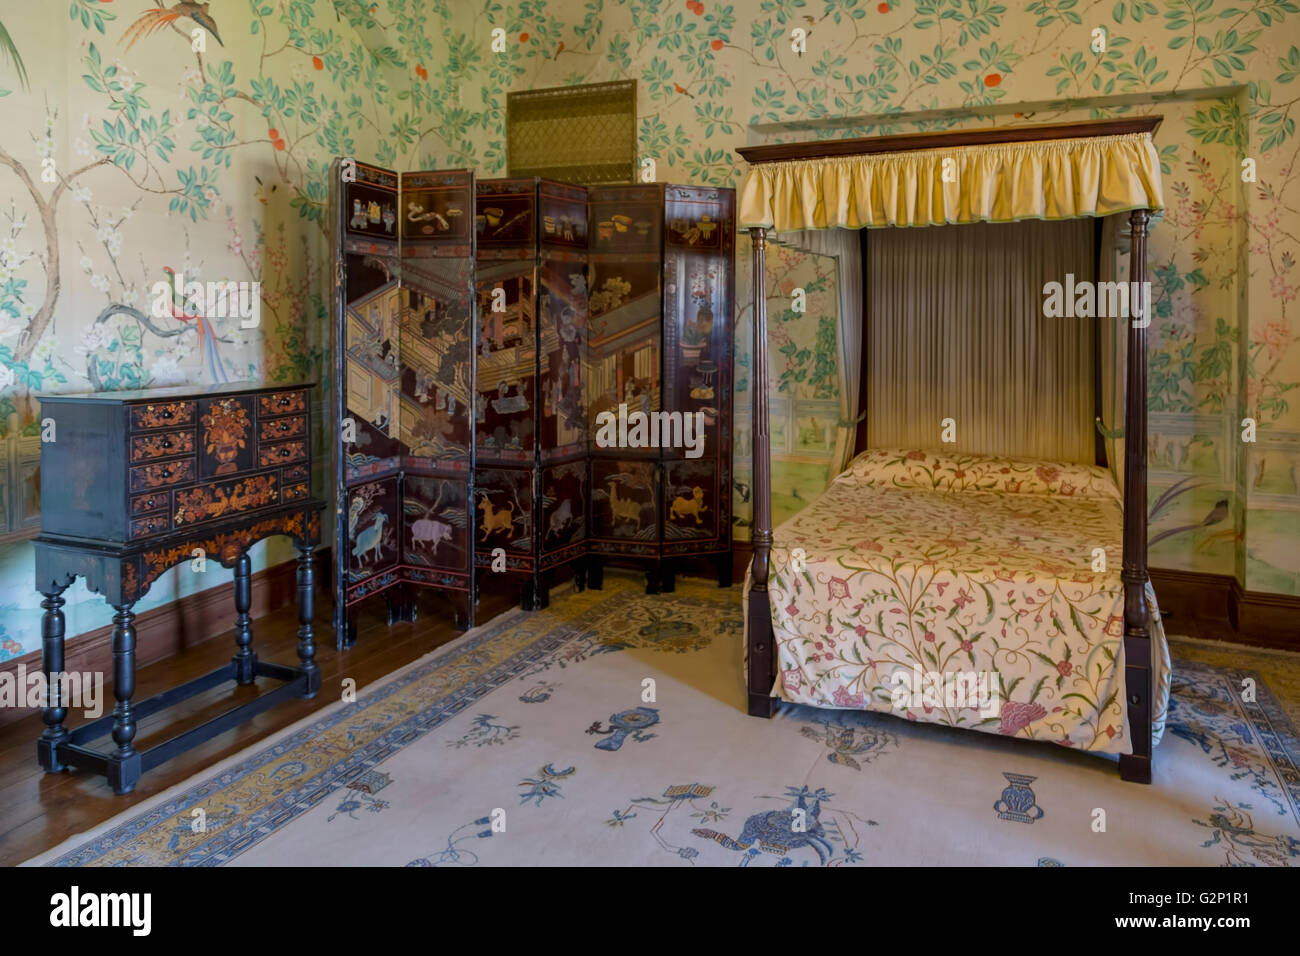 The Balcony Bedroom (The Chinese Bedroom) with a modern reproduction of hand-painted Chinese wallpaper, Kilkenny Castle, Ireland Stock Photo